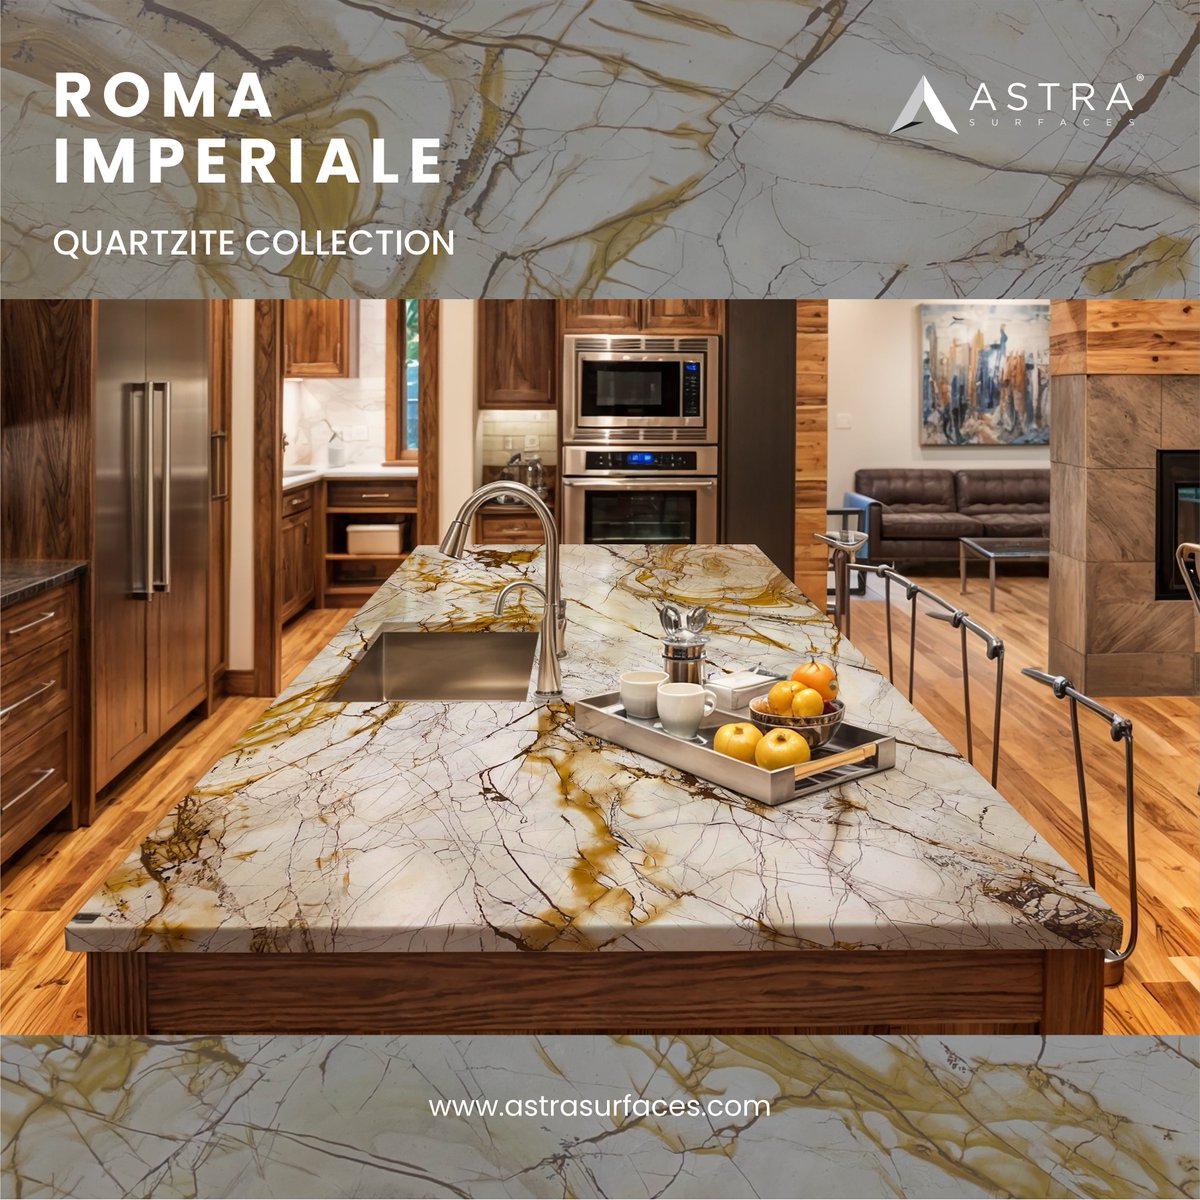 Discover Roma Imperiale #Quartzite #countertops : durable, versatile, and elegantly timeless, perfect for creating lasting beauty in your #interiorspace

#naturalstone #countertops #countertopideas #kitchendecor #decorideas #renovation #homerenovation #homeremodeling #kitchen